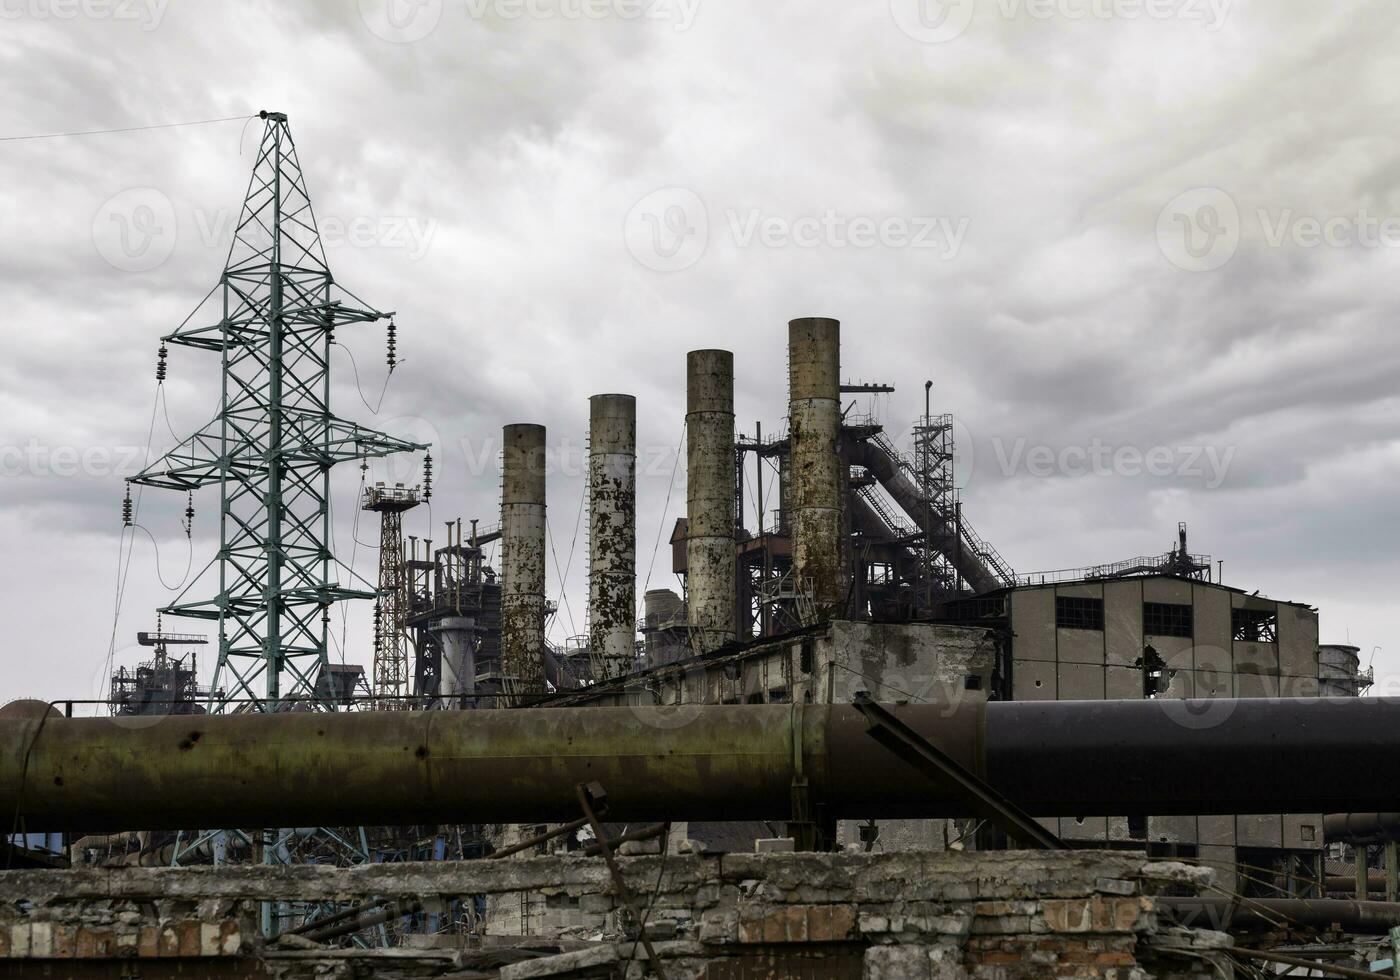 destroyed buildings of the workshop of the Azovstal plant in Mariupol Ukraine photo